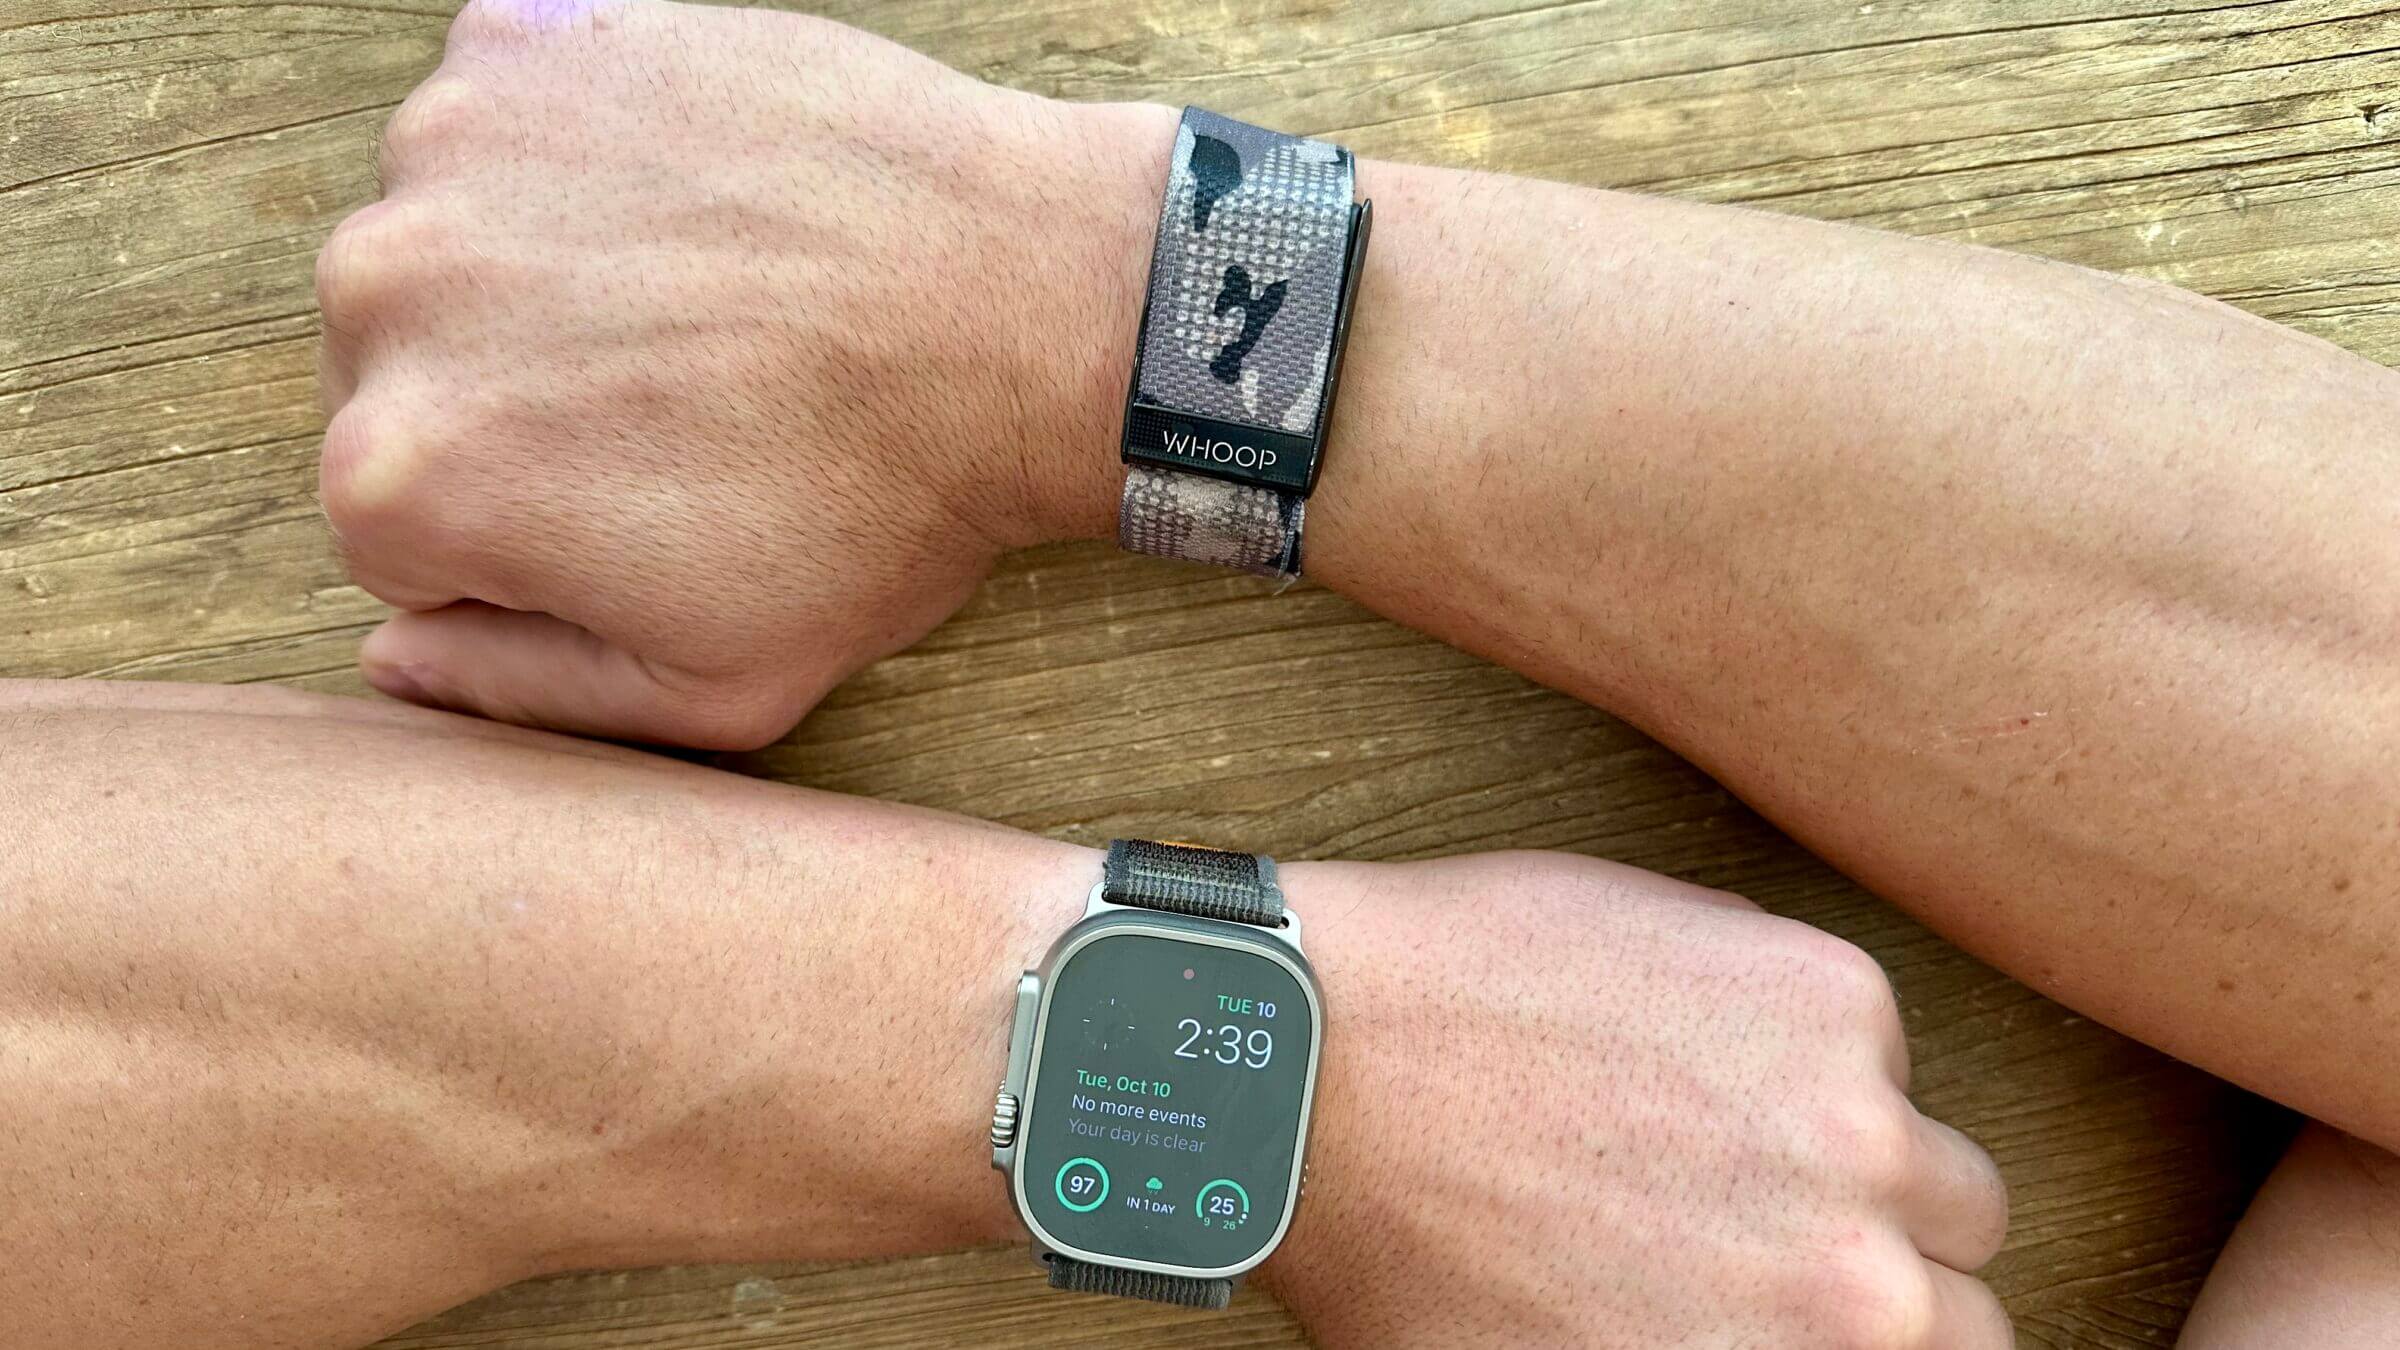 WHOOP vs Apple Watch for Fitness and Sleep Tracking